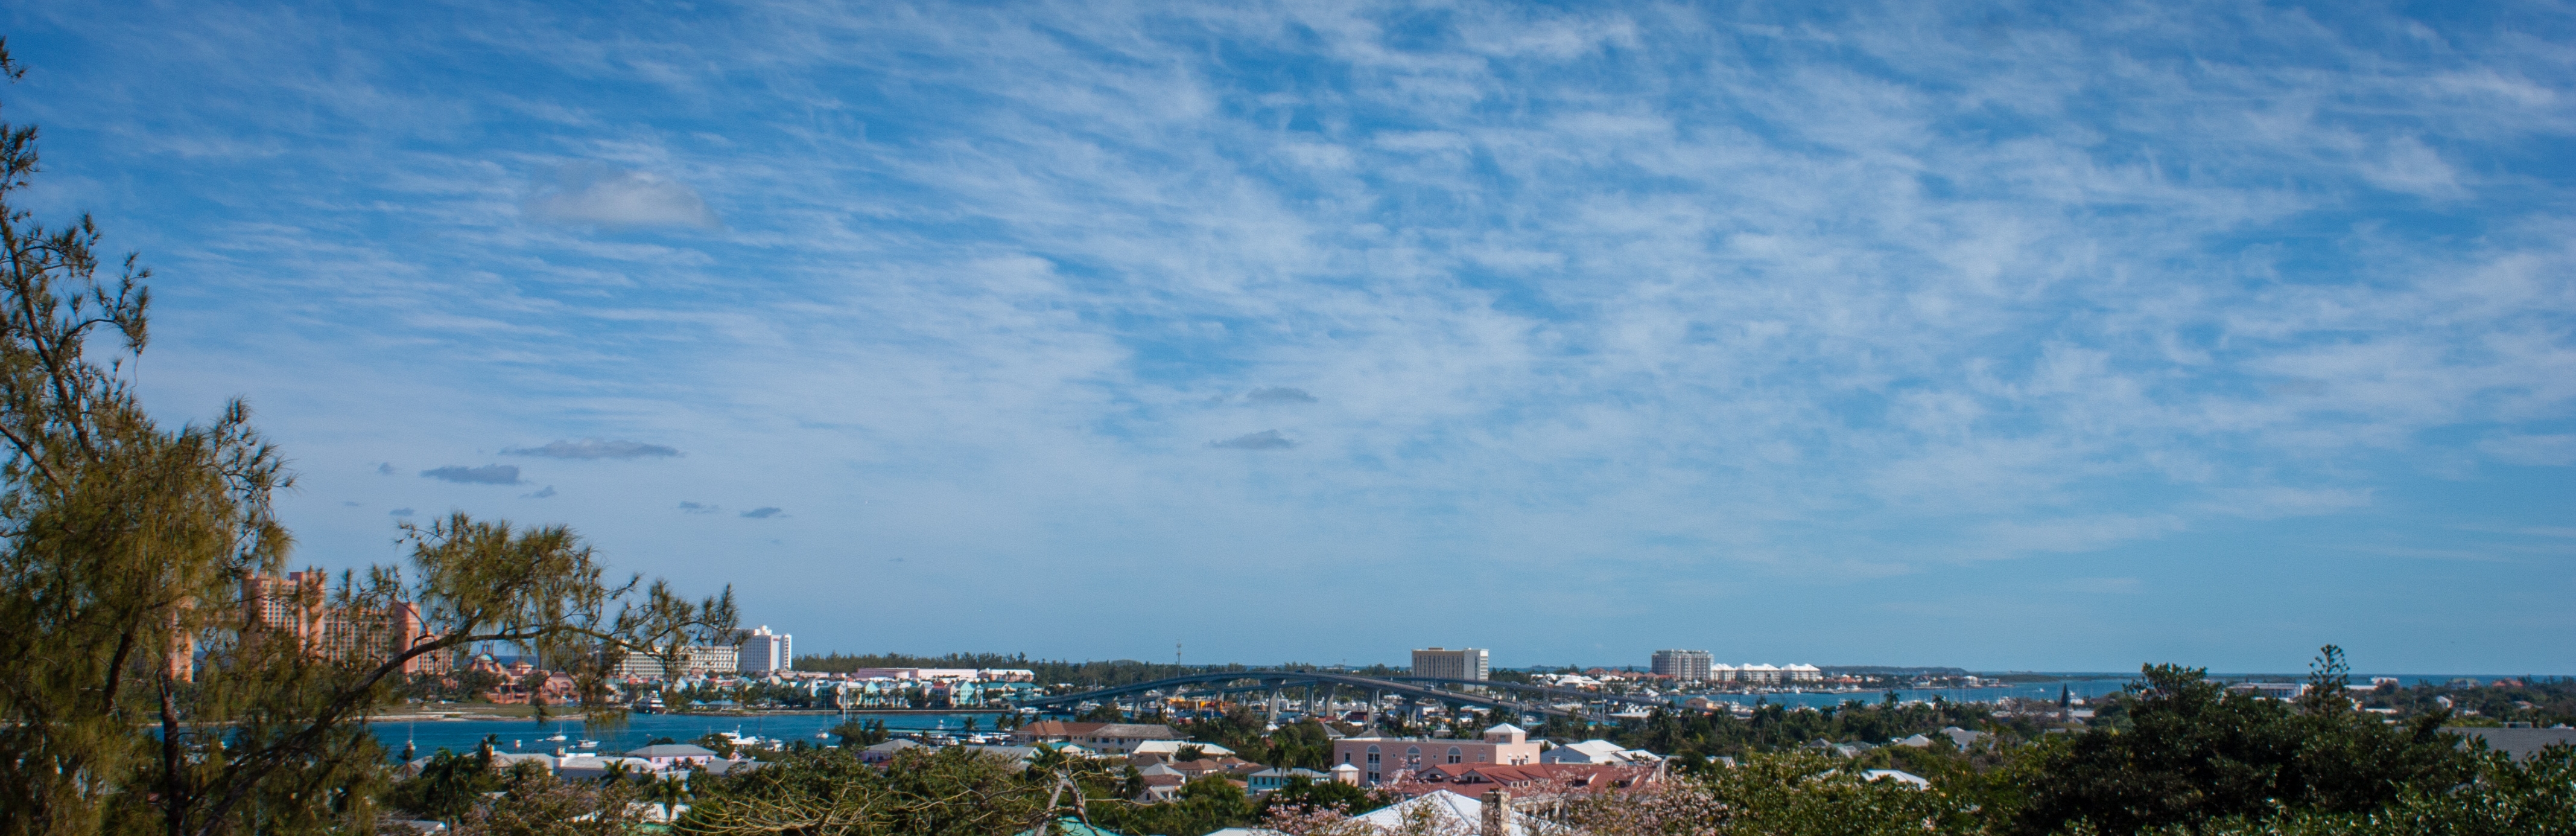 View of Nassau from Fort Fincastle